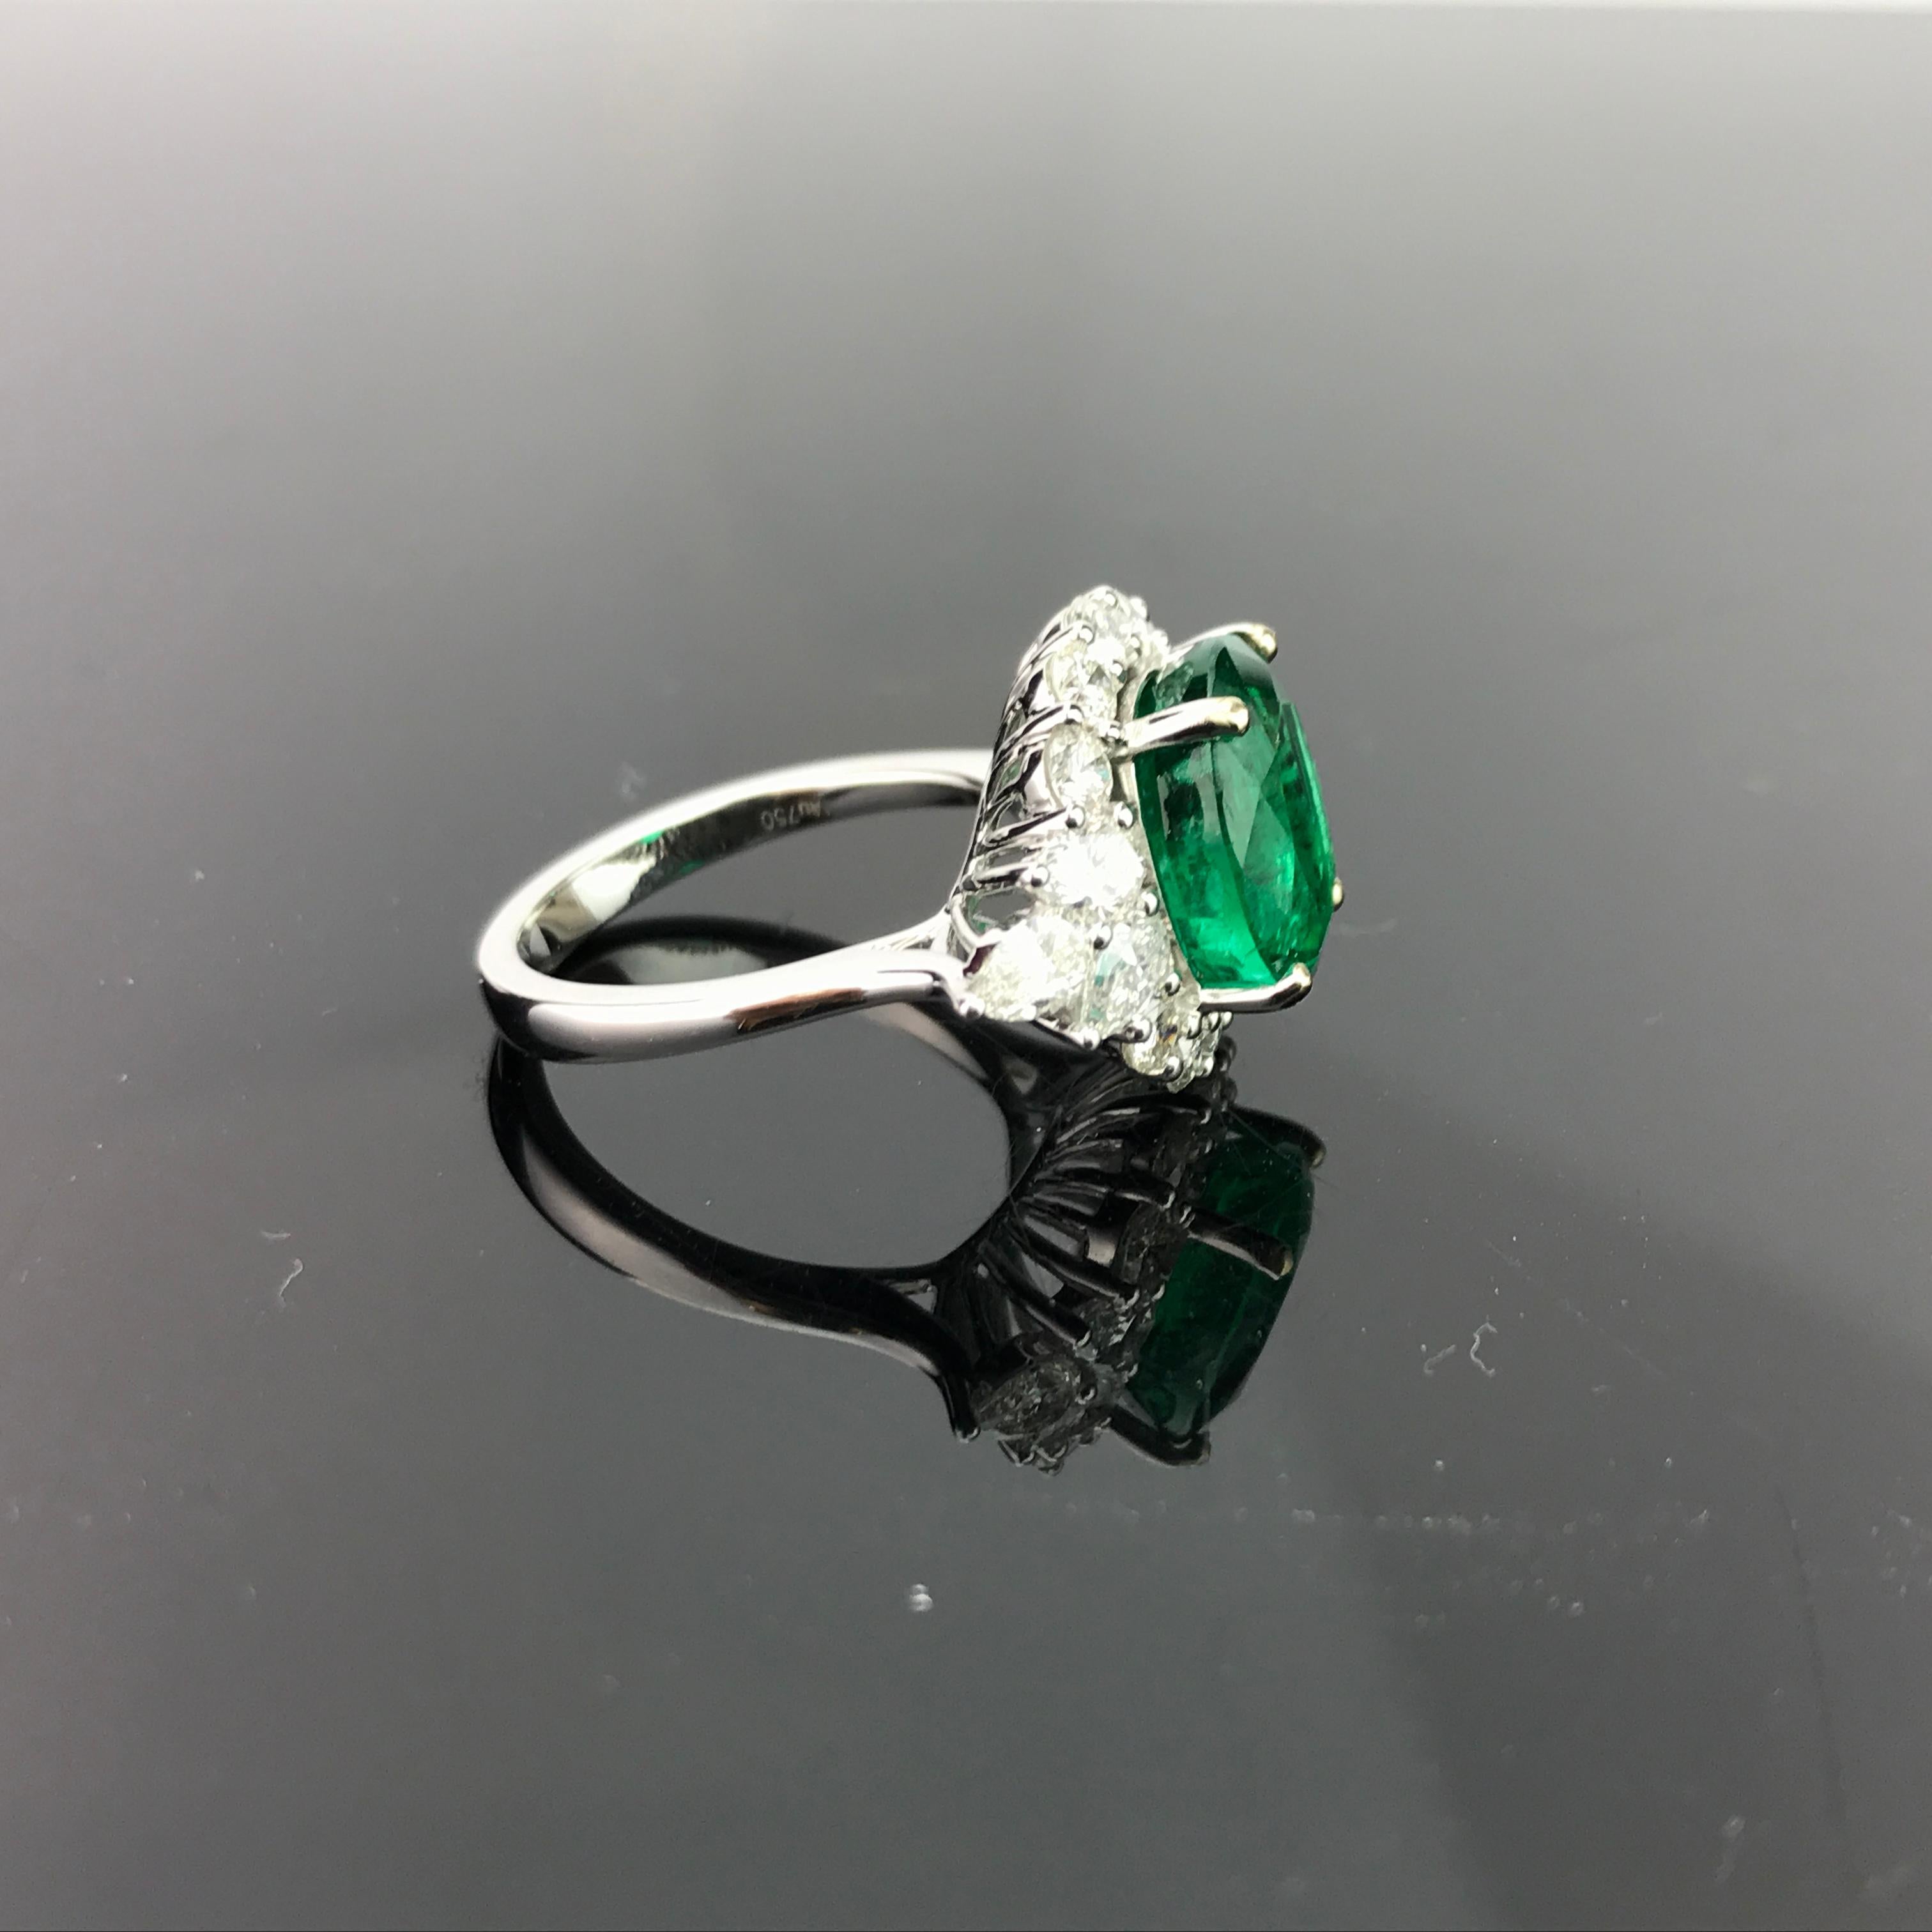 An absolutelty gorgeous Zambian Emerald with great colour and lustre, adorned with White Diamonds, all set in 18K white gold. 

Stone Details: 
Stone: Emerald
Carat Weight: 4.85 carats

Diamond Details: 
Total Carat Weight: 1.85 carat
Quality: VS ,